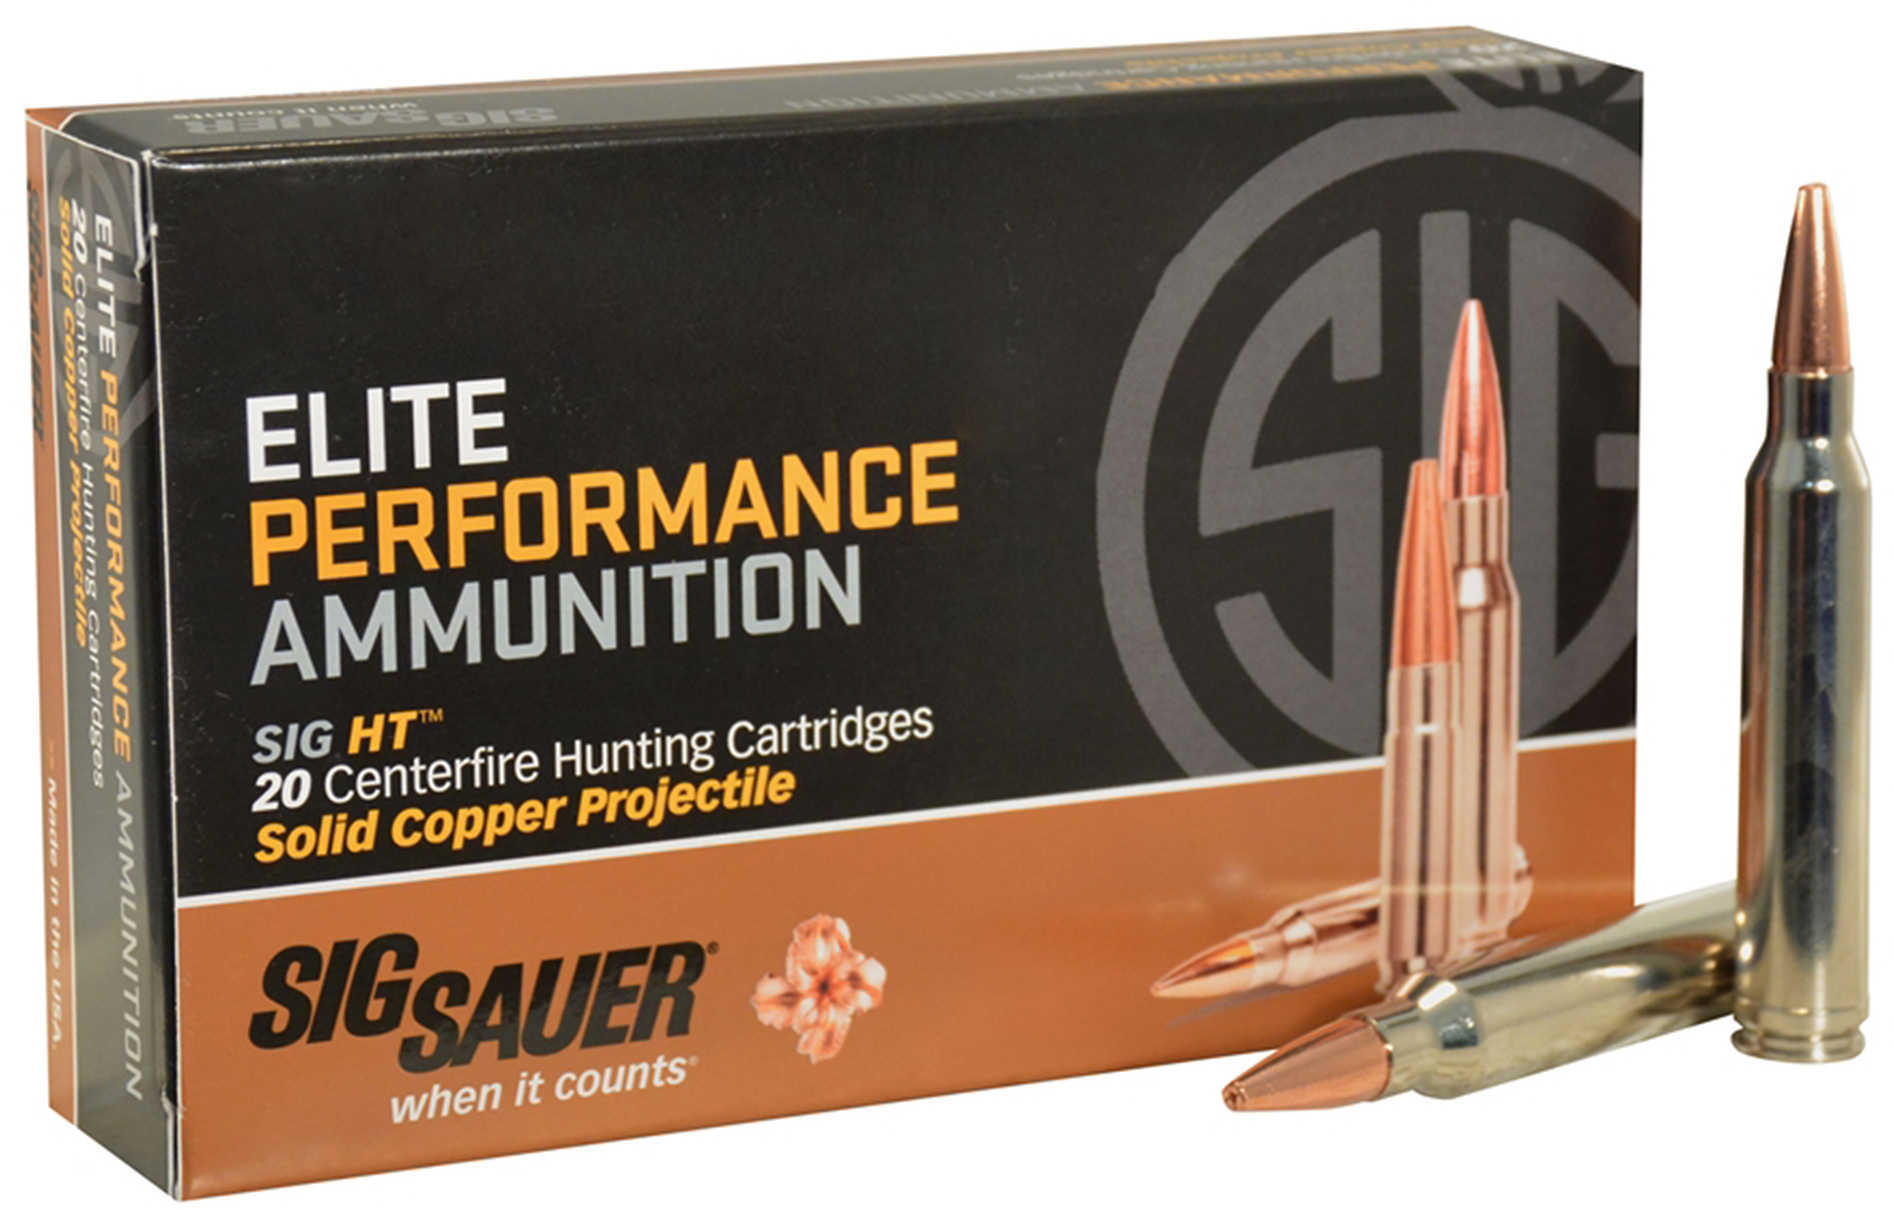 300 Win Mag 165 Grain Jacketed Soft Point 20 Rounds Sig Sauer Ammunition 300 Winchester Magnum